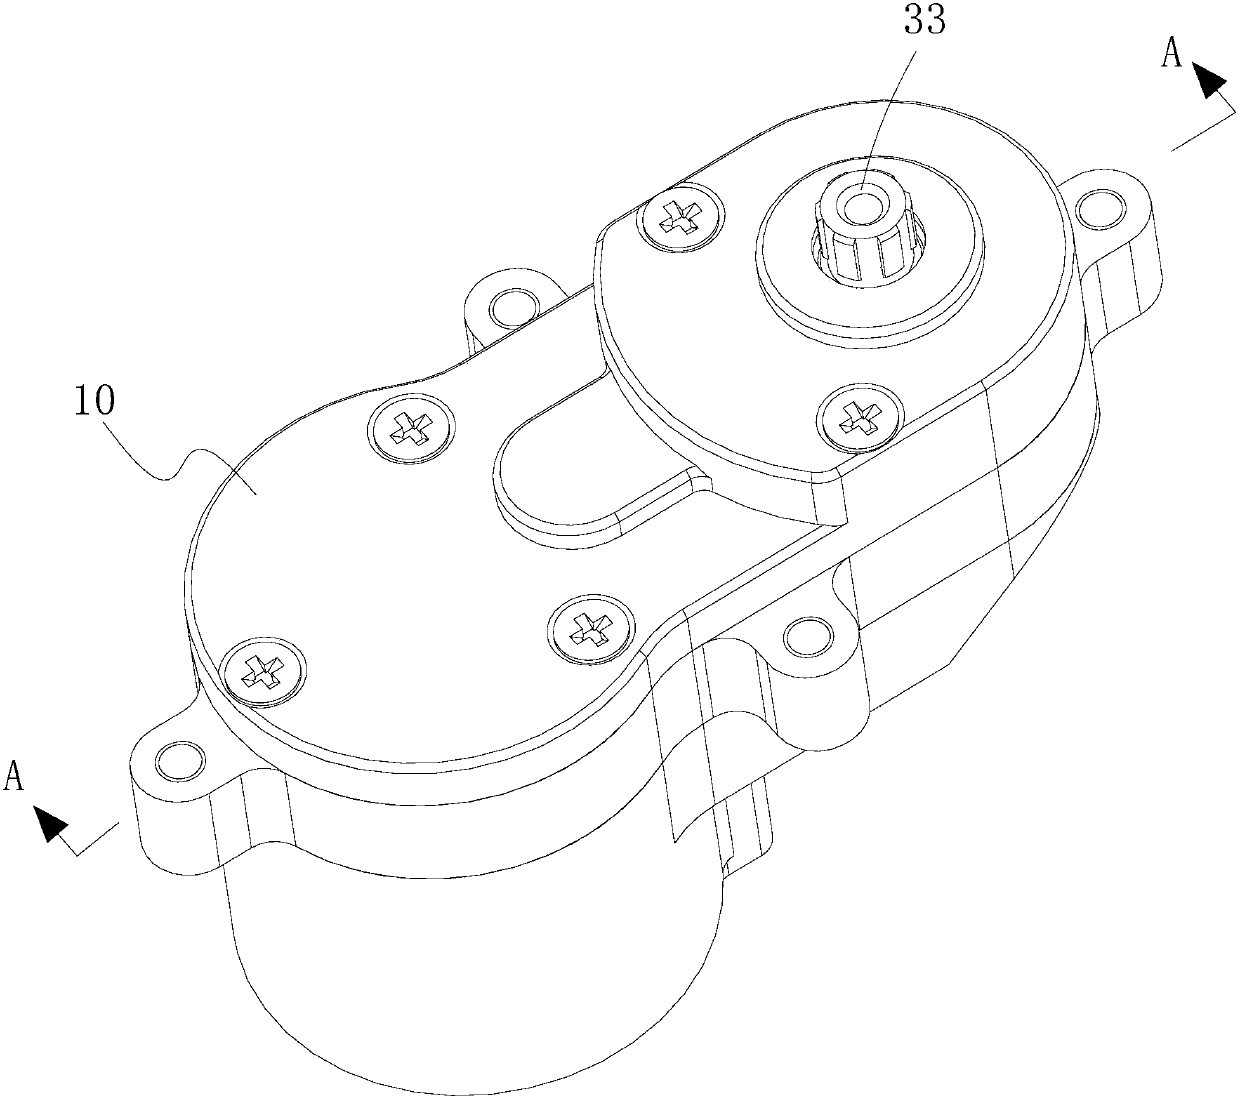 Steering gear and holder equipment with same